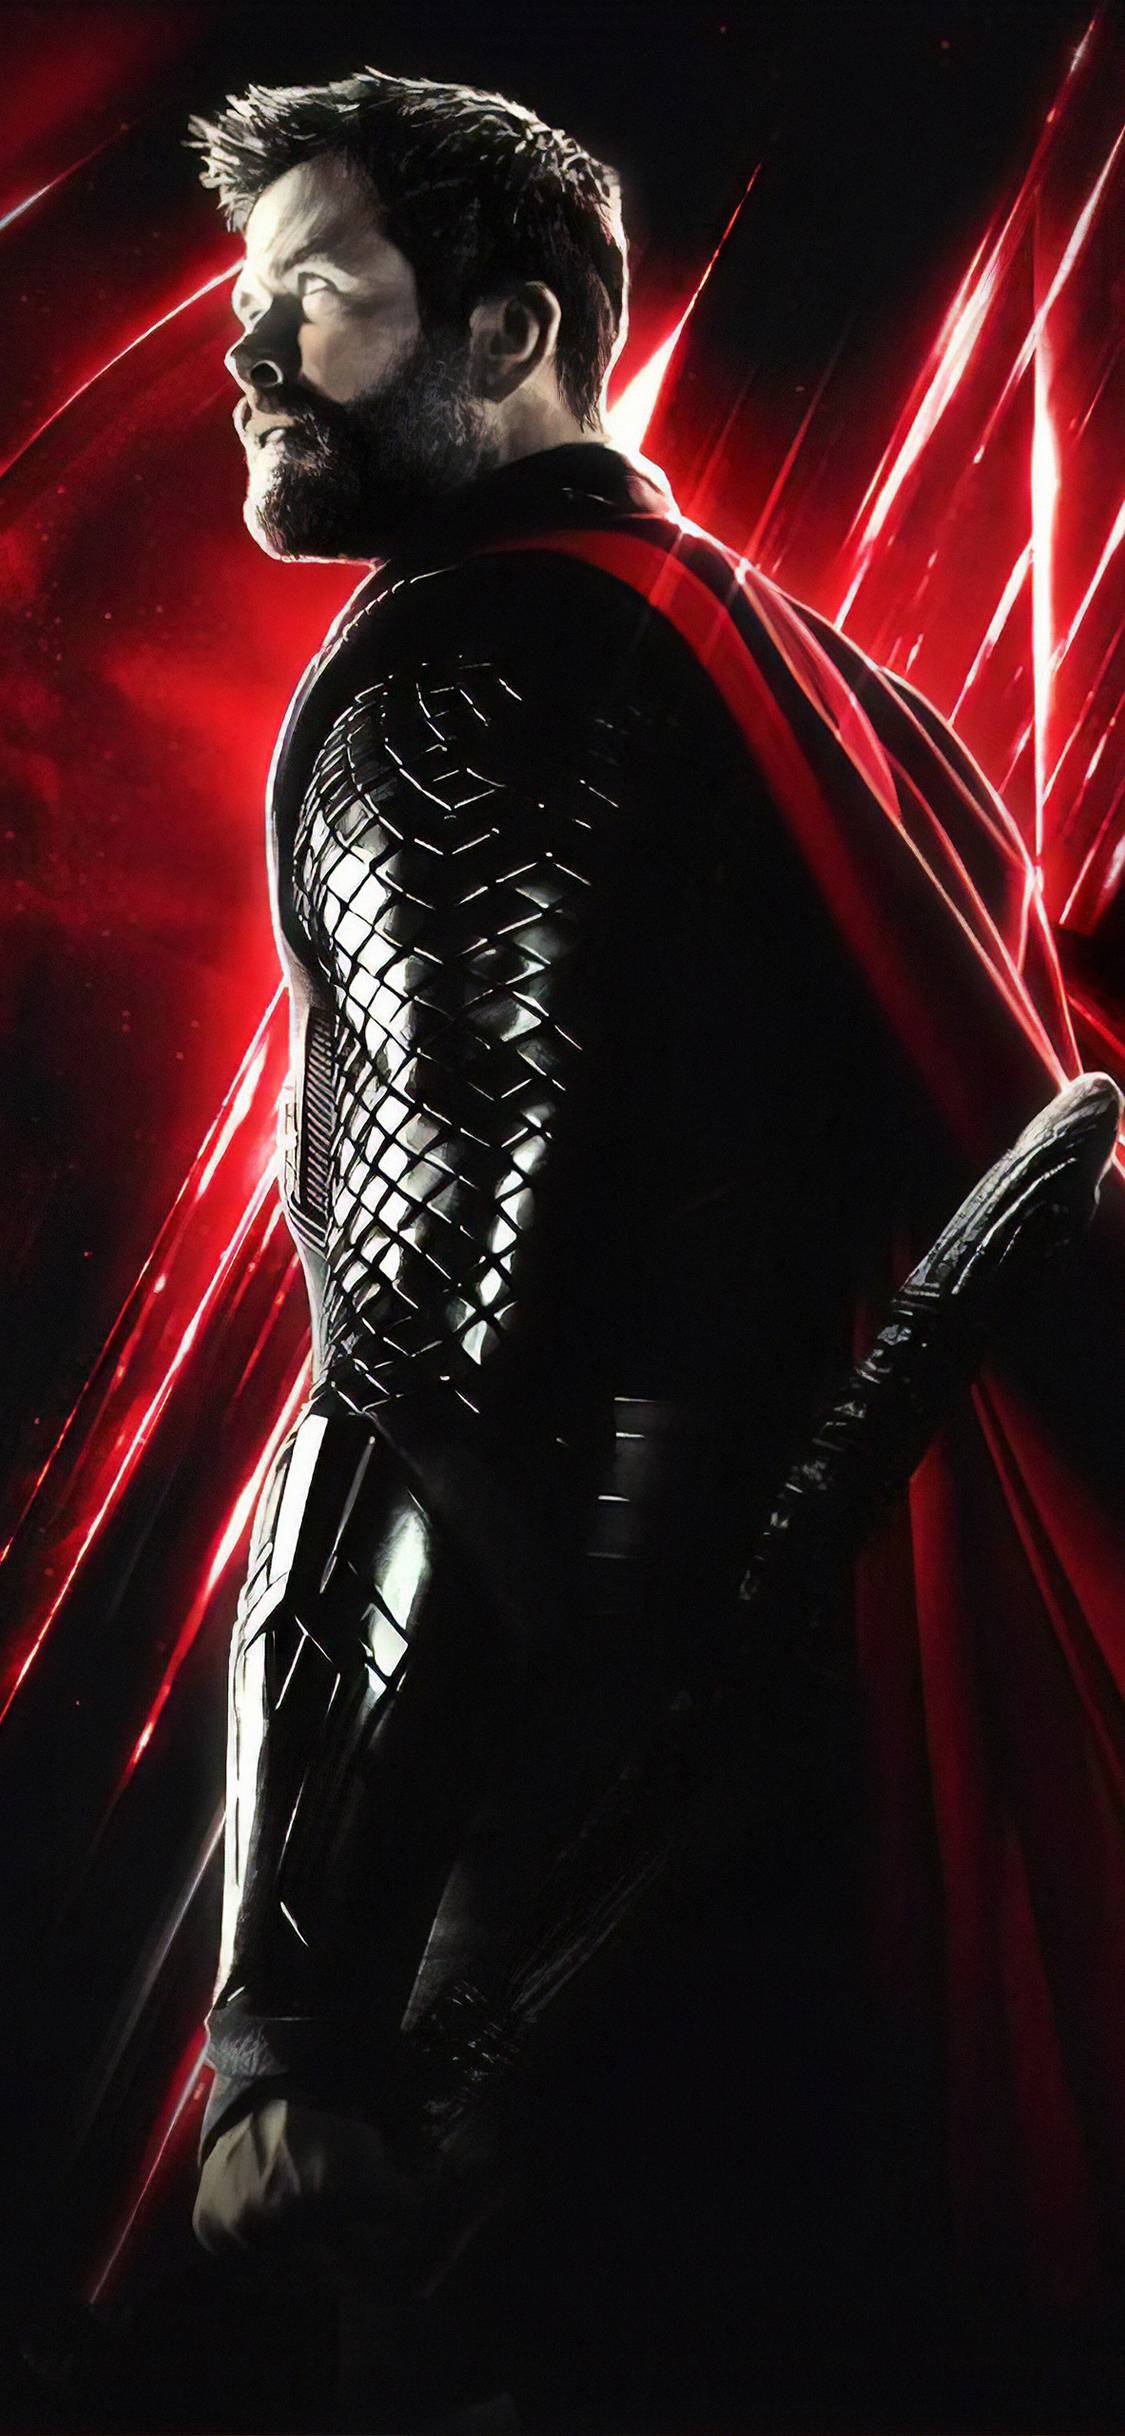 Thor in a red cloak with a red and black background - Marvel, Thor